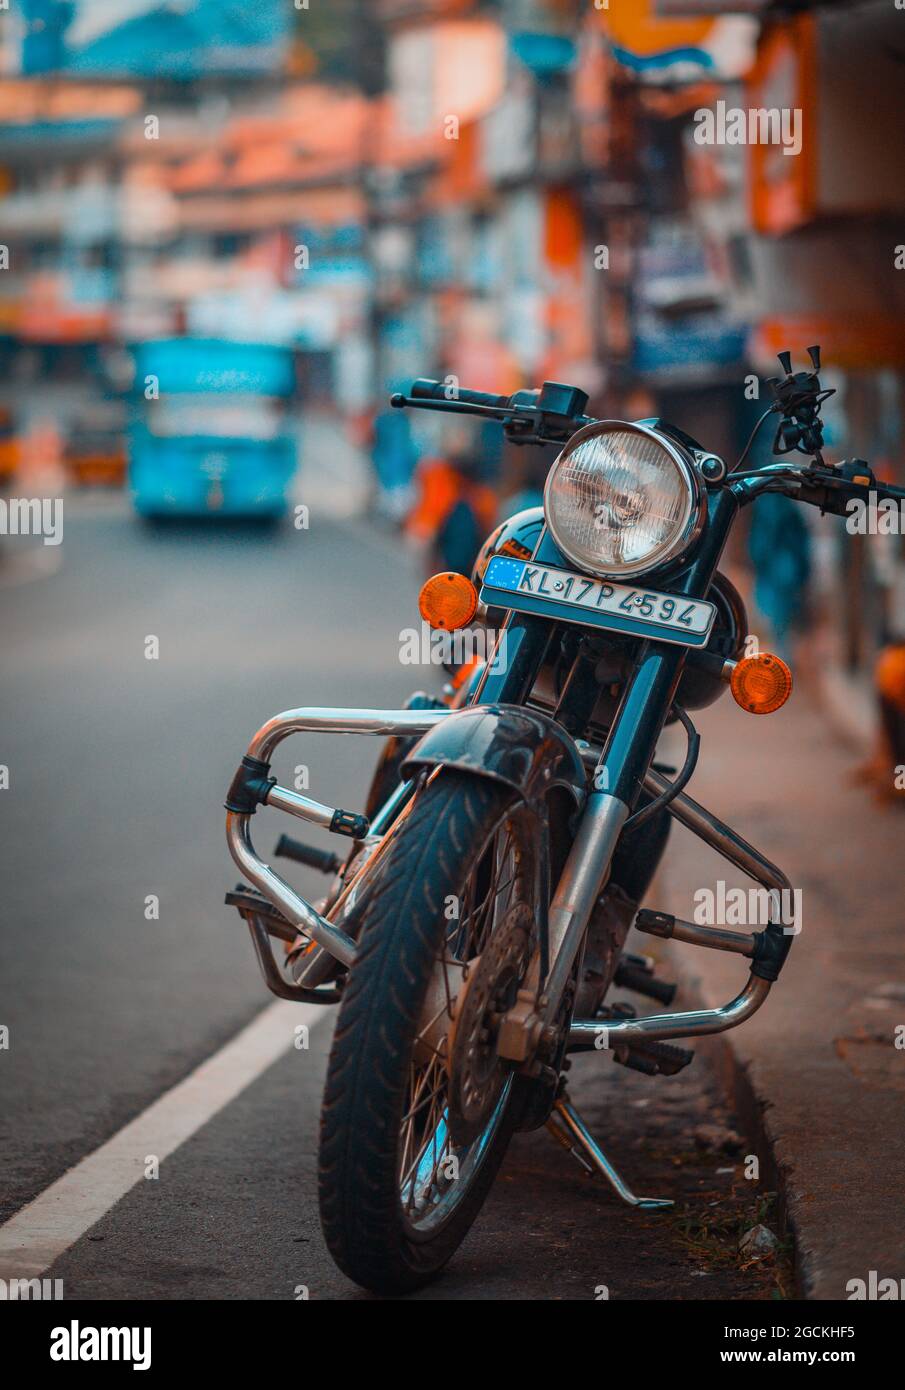 Royal Enfield Parked on road side Stock Photo